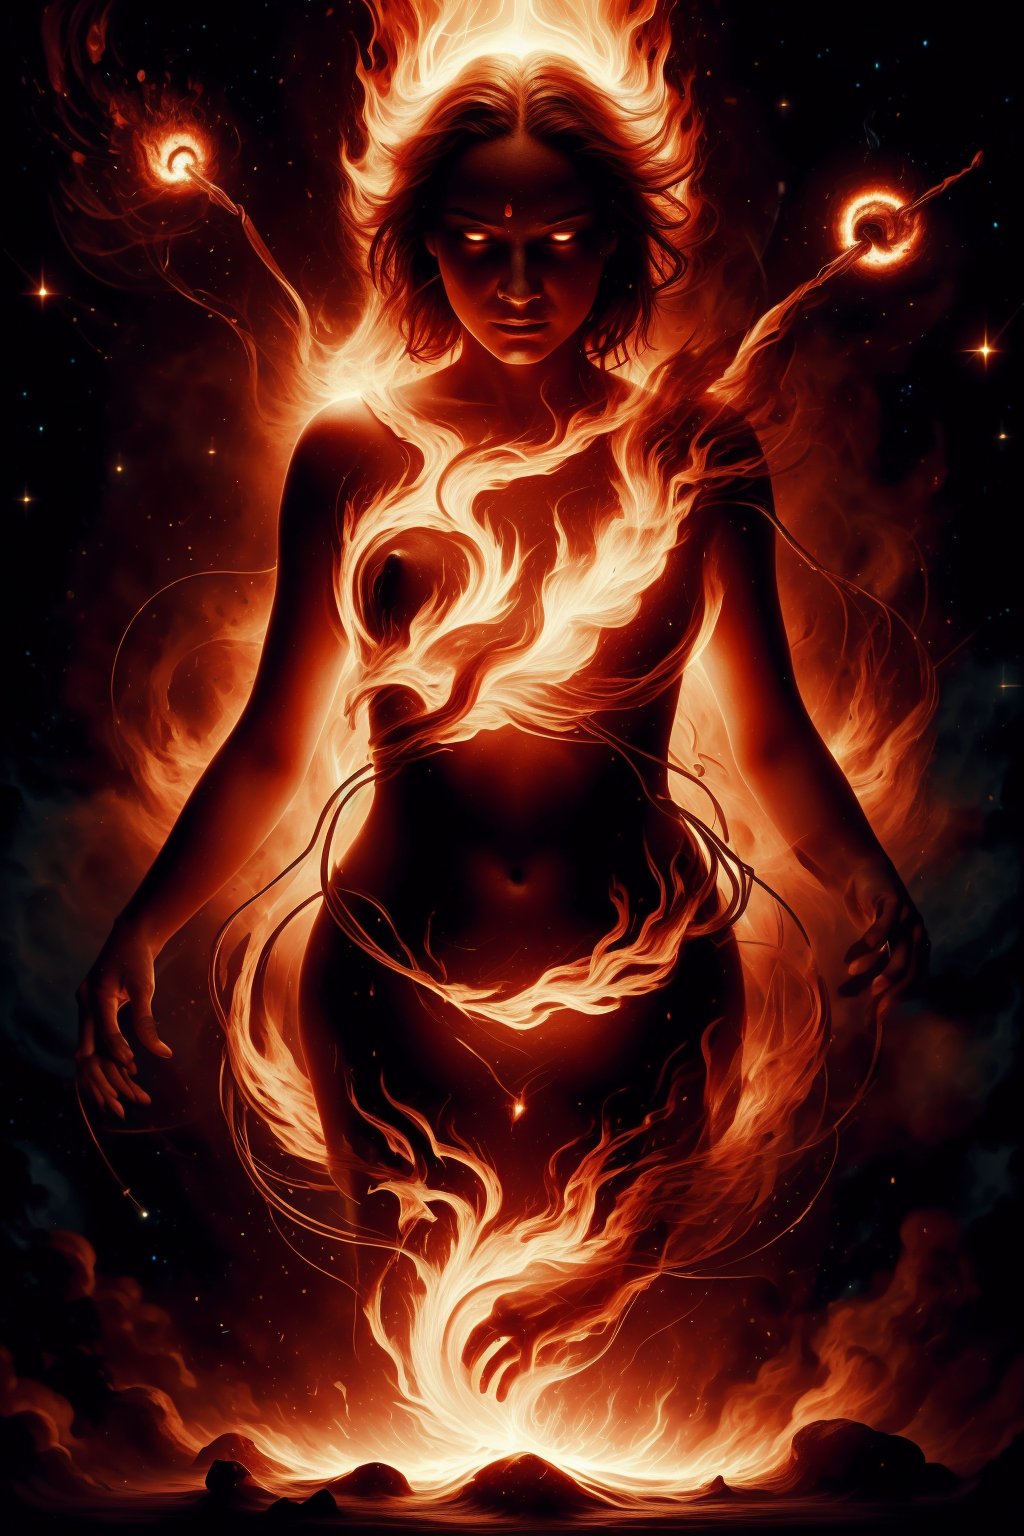 magic thunder,,glowing forehead, big navel, 40year old women body, ,fireastrologystylecontrol over fire in a mesmerizing display of power, depicted through a digital illustration inspired by the dynamic energy of Alex Andreev's artwork.